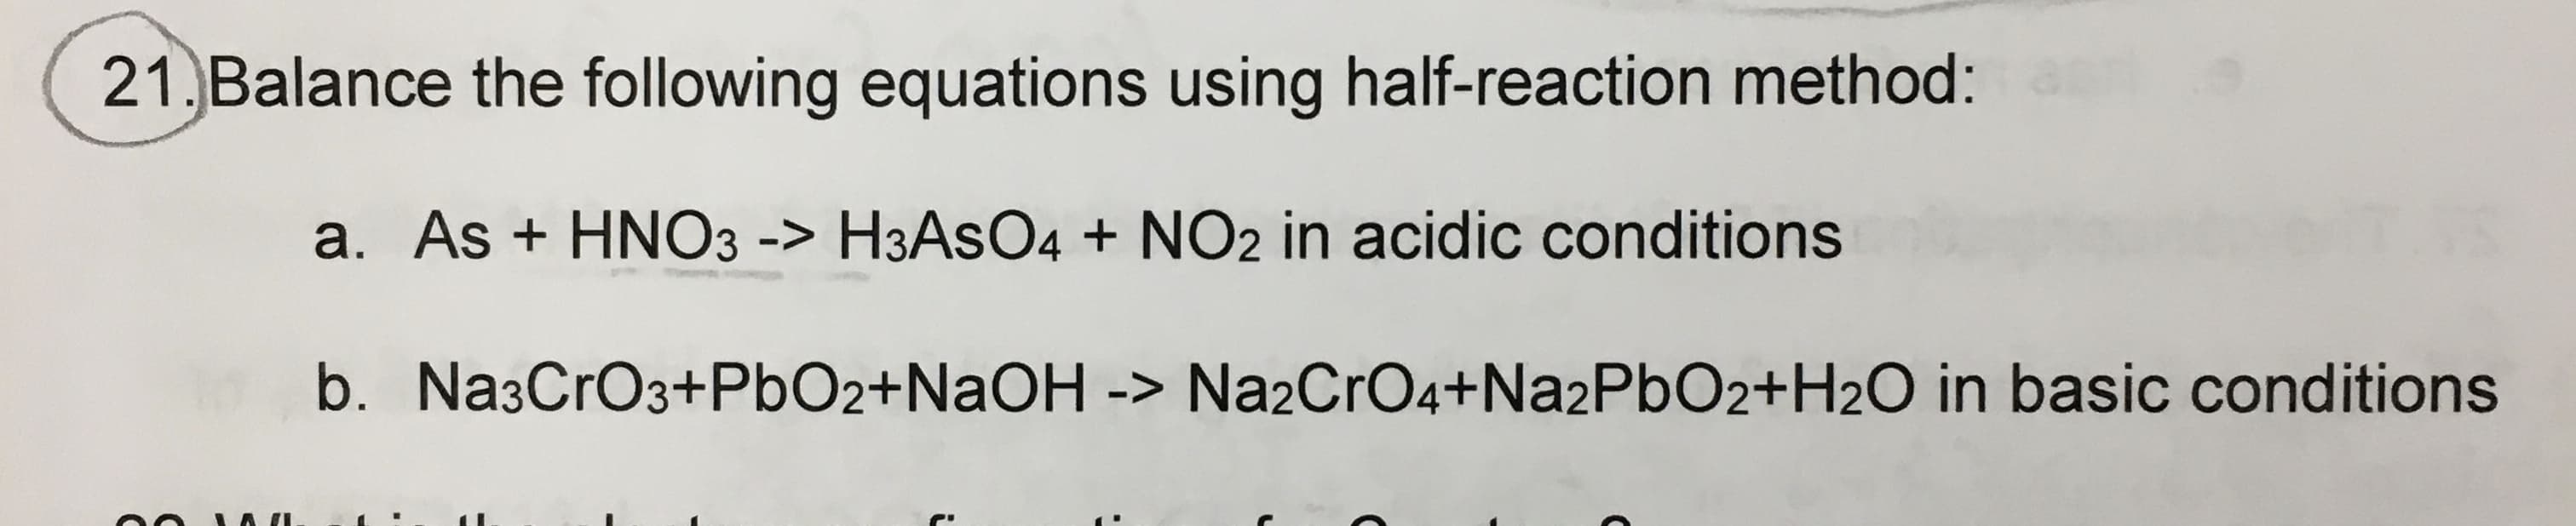 21. Balance the following equations using half-reaction method:
a. As + HNO3 -> H3ASO4 + NO2 in acidic conditions
b. Na3CrO3+PbO2+NAOH -> Na2CrO4+Na2PbO2+H2O in basic conditions
